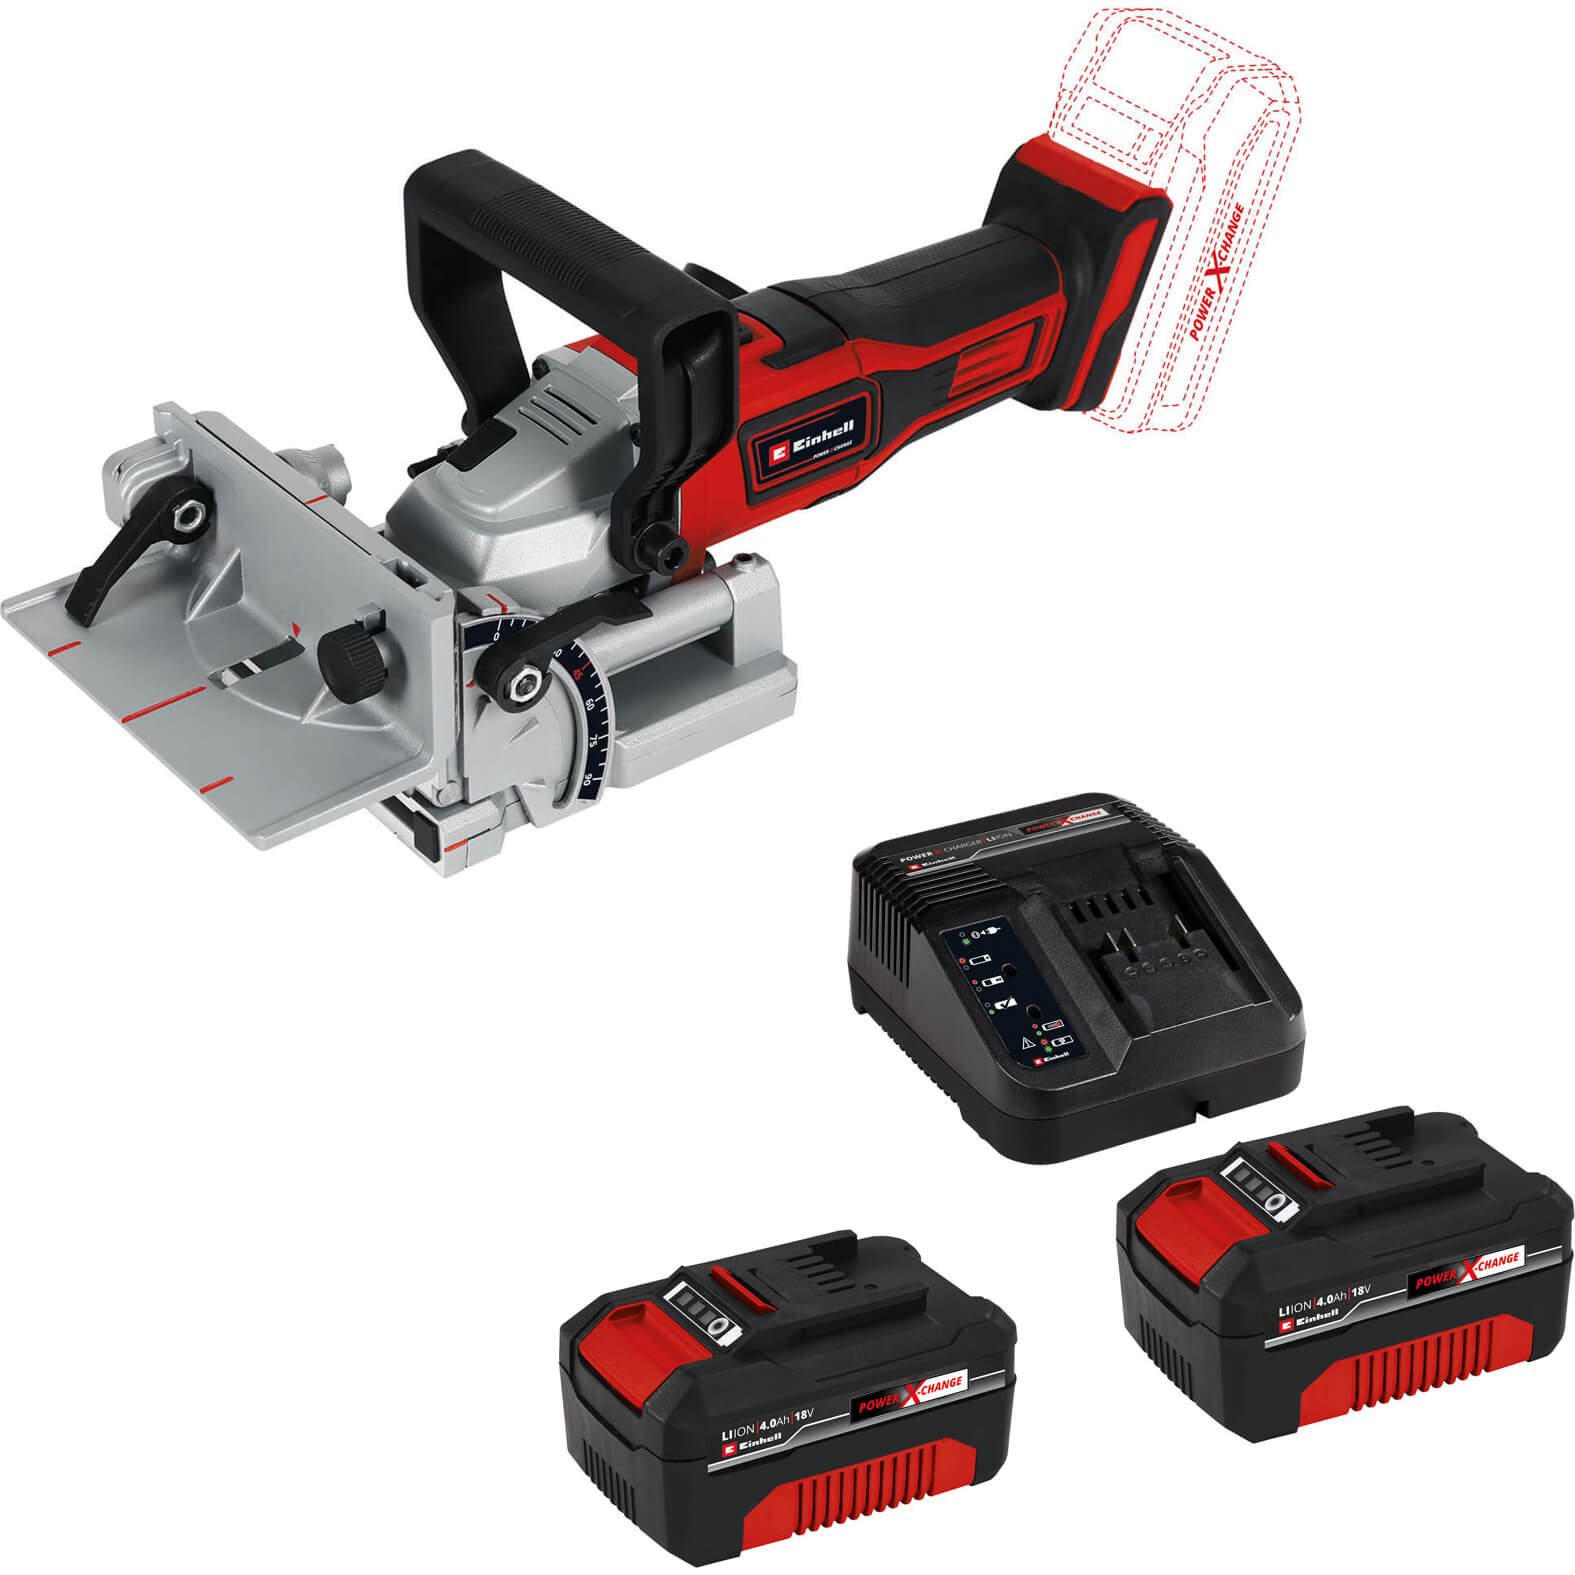 Image of Einhell TE-BJ 18 Li 18v Cordless Biscuit Jointer 2 x 4ah Li-ion Charger No Case